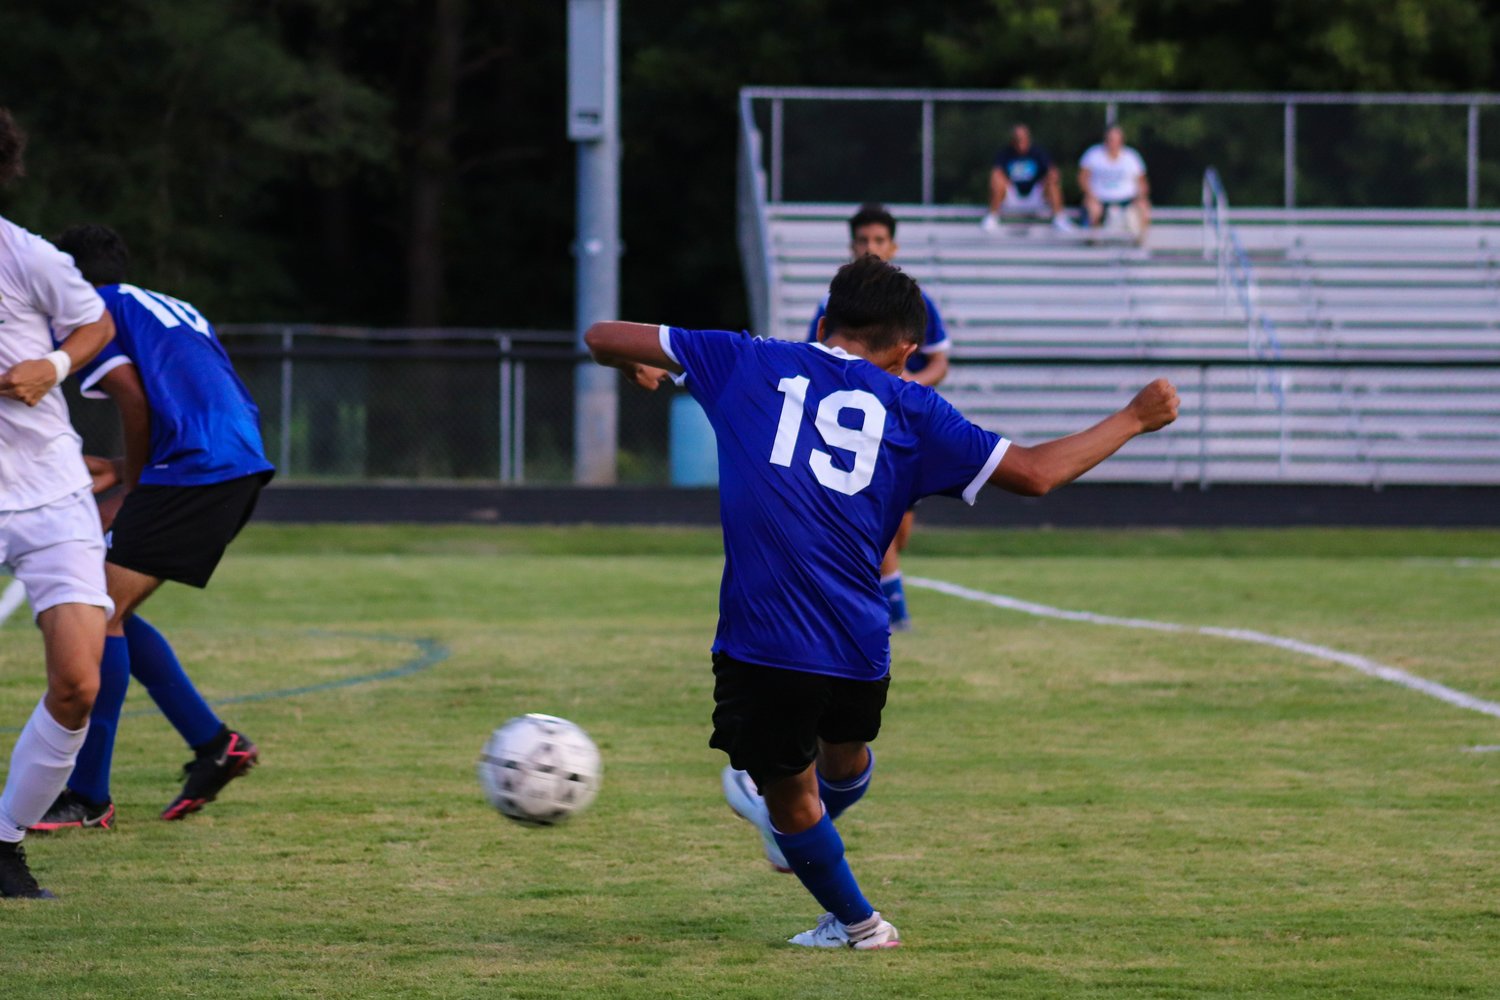 Jordan-Matthews senior Alexis Ibarra (19) takes a shot in in the Jets' 4-1 season-opening win over Northwood last Thursday in Siler City. In total, J-M had 14 shots on goal.